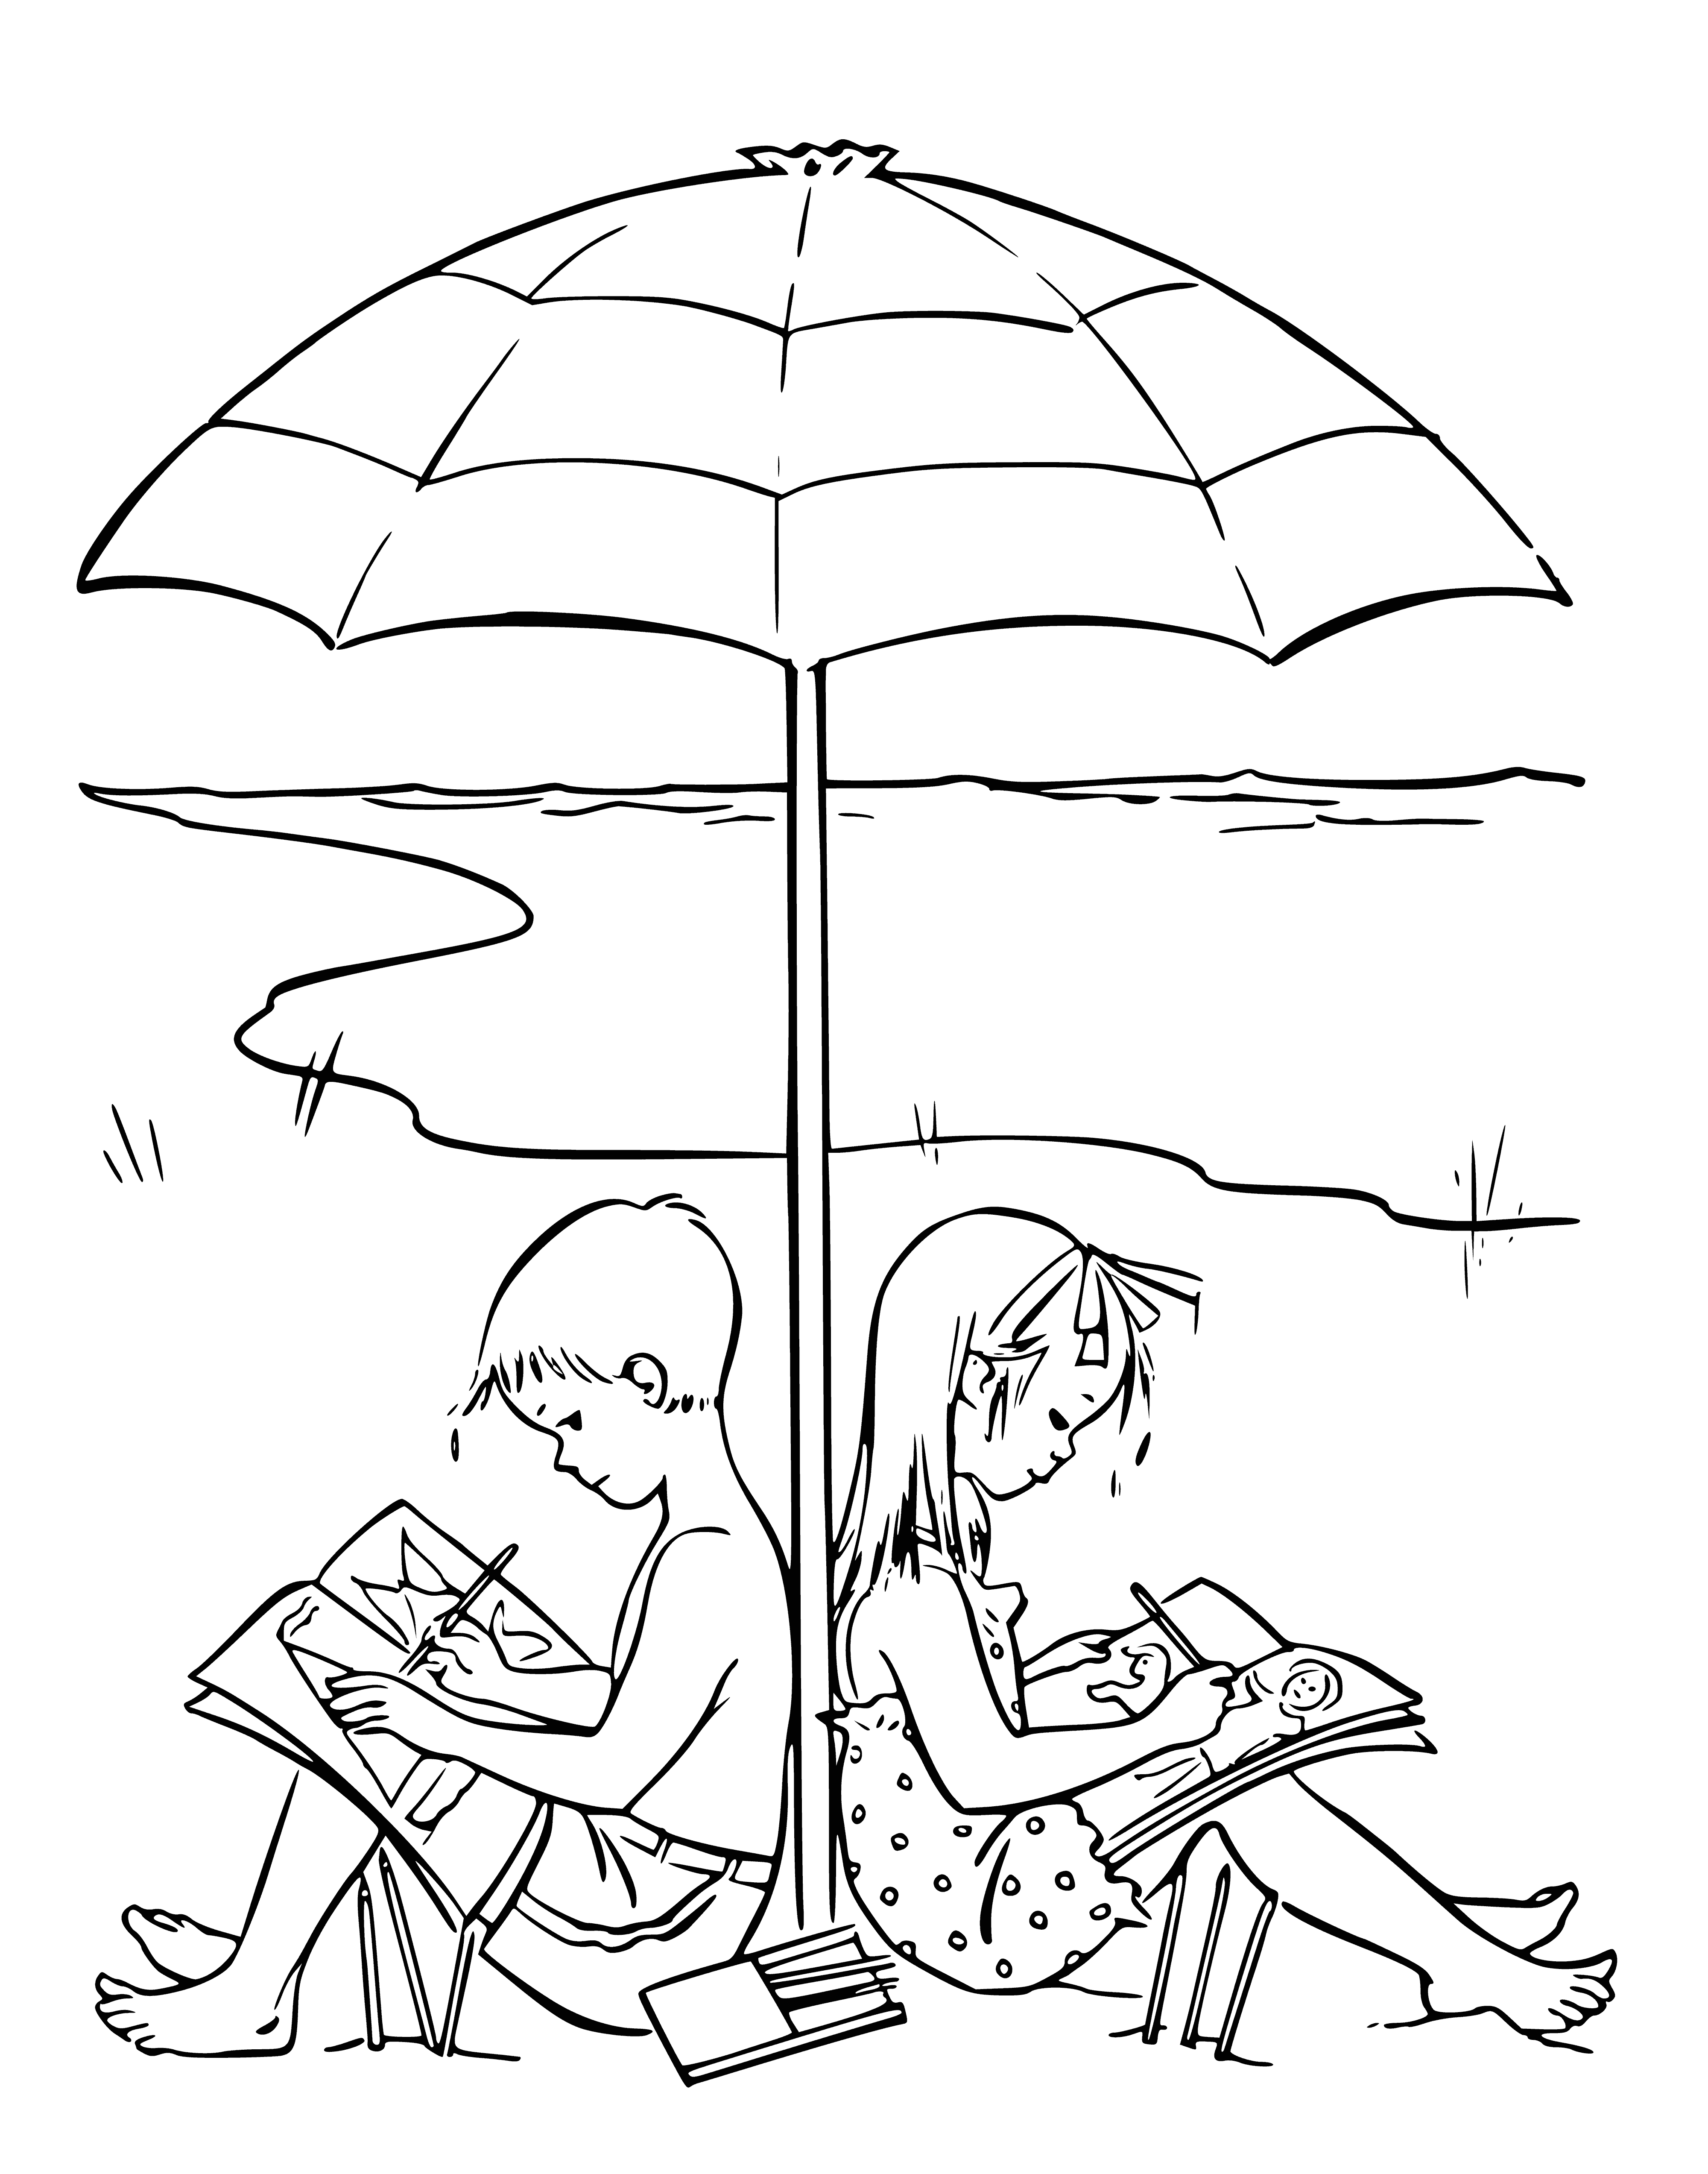 coloring page: Kids playing on the beach building a sandcastle - lots of fun under the umbrella! #SummerVacay